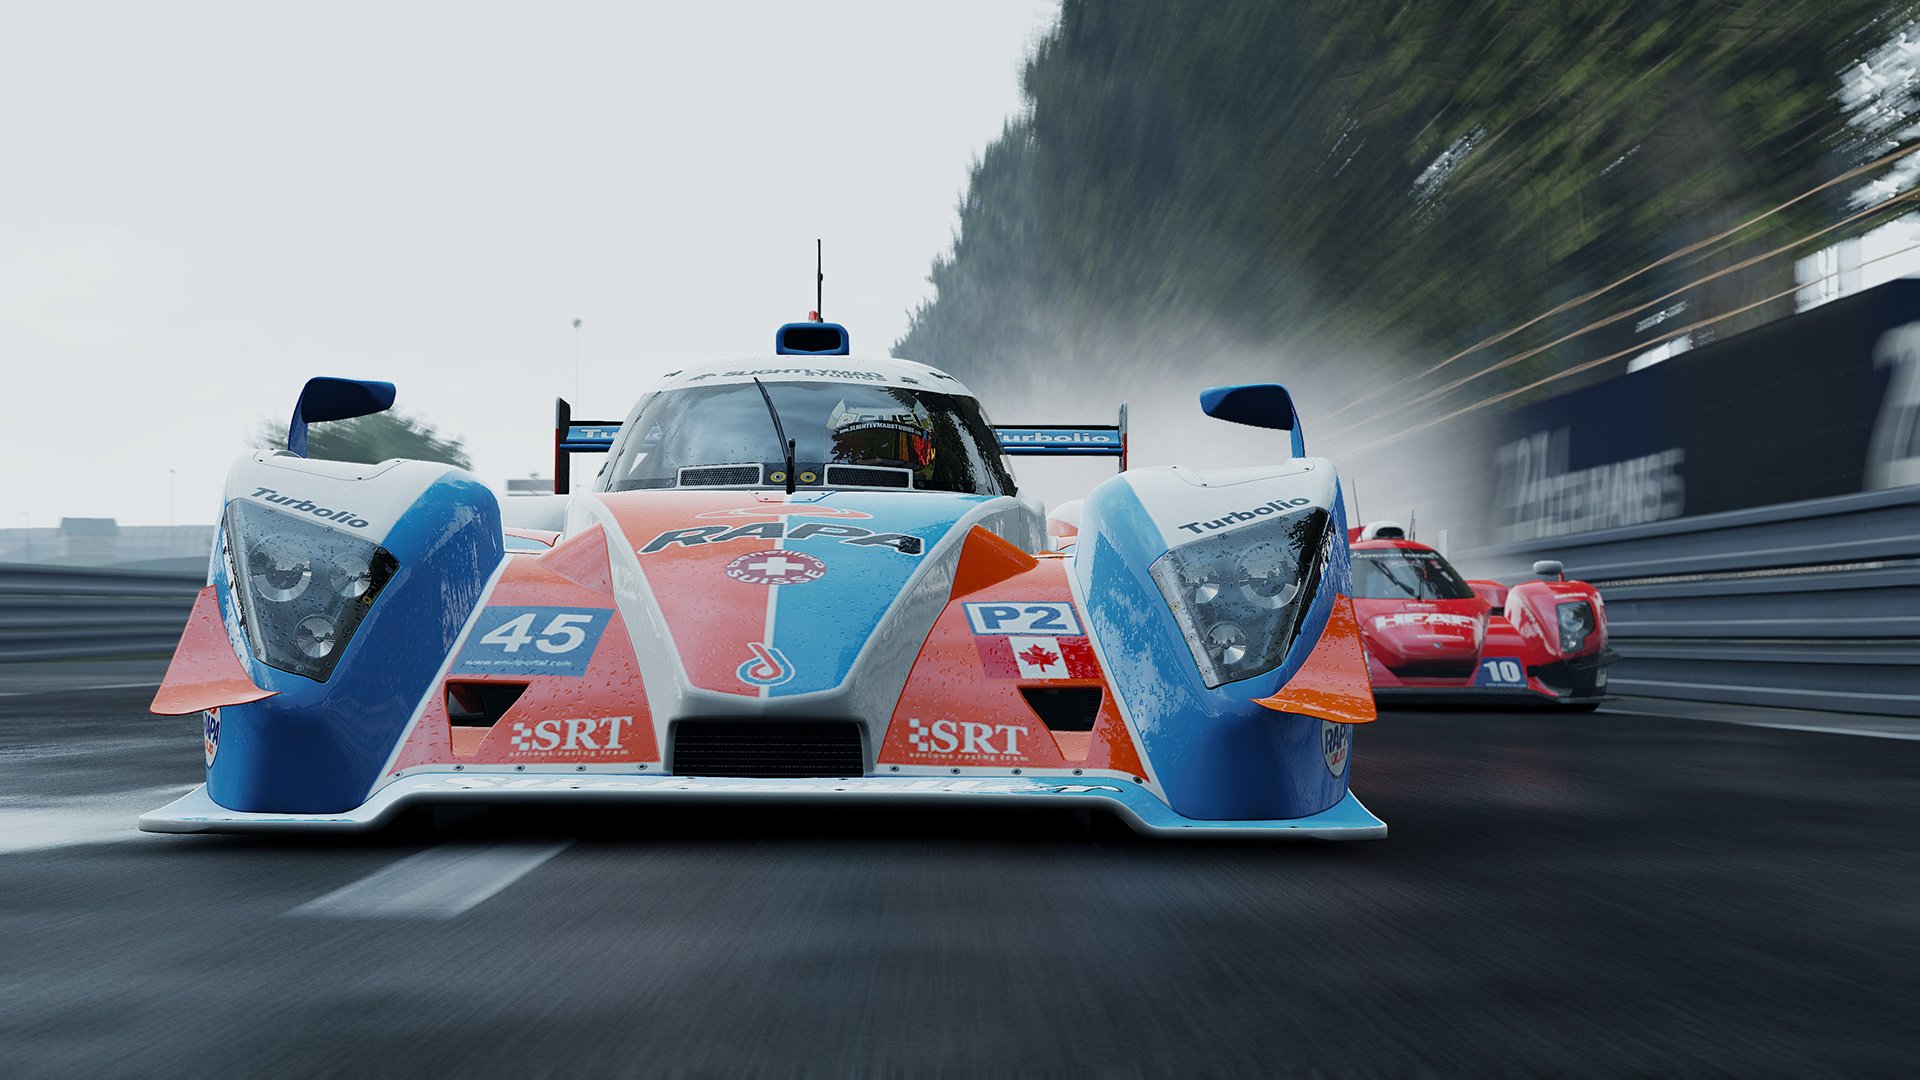 project cars 2 ps4 download free